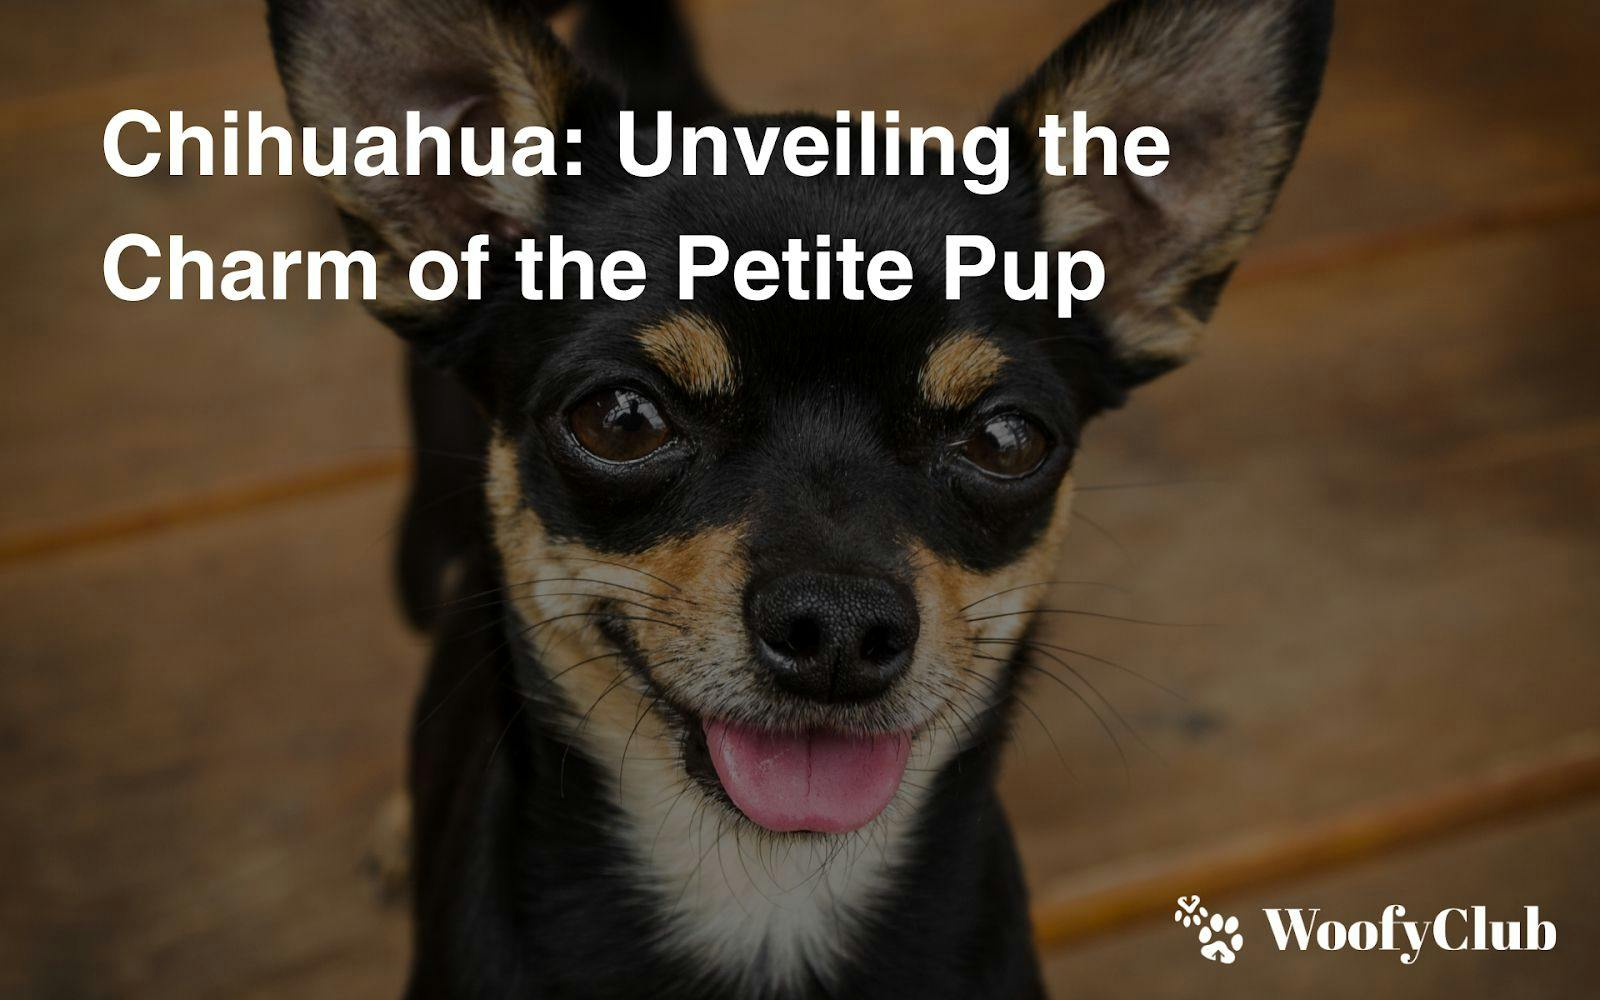 Chihuahua: Unveiling The Charm Of The Petite Pup